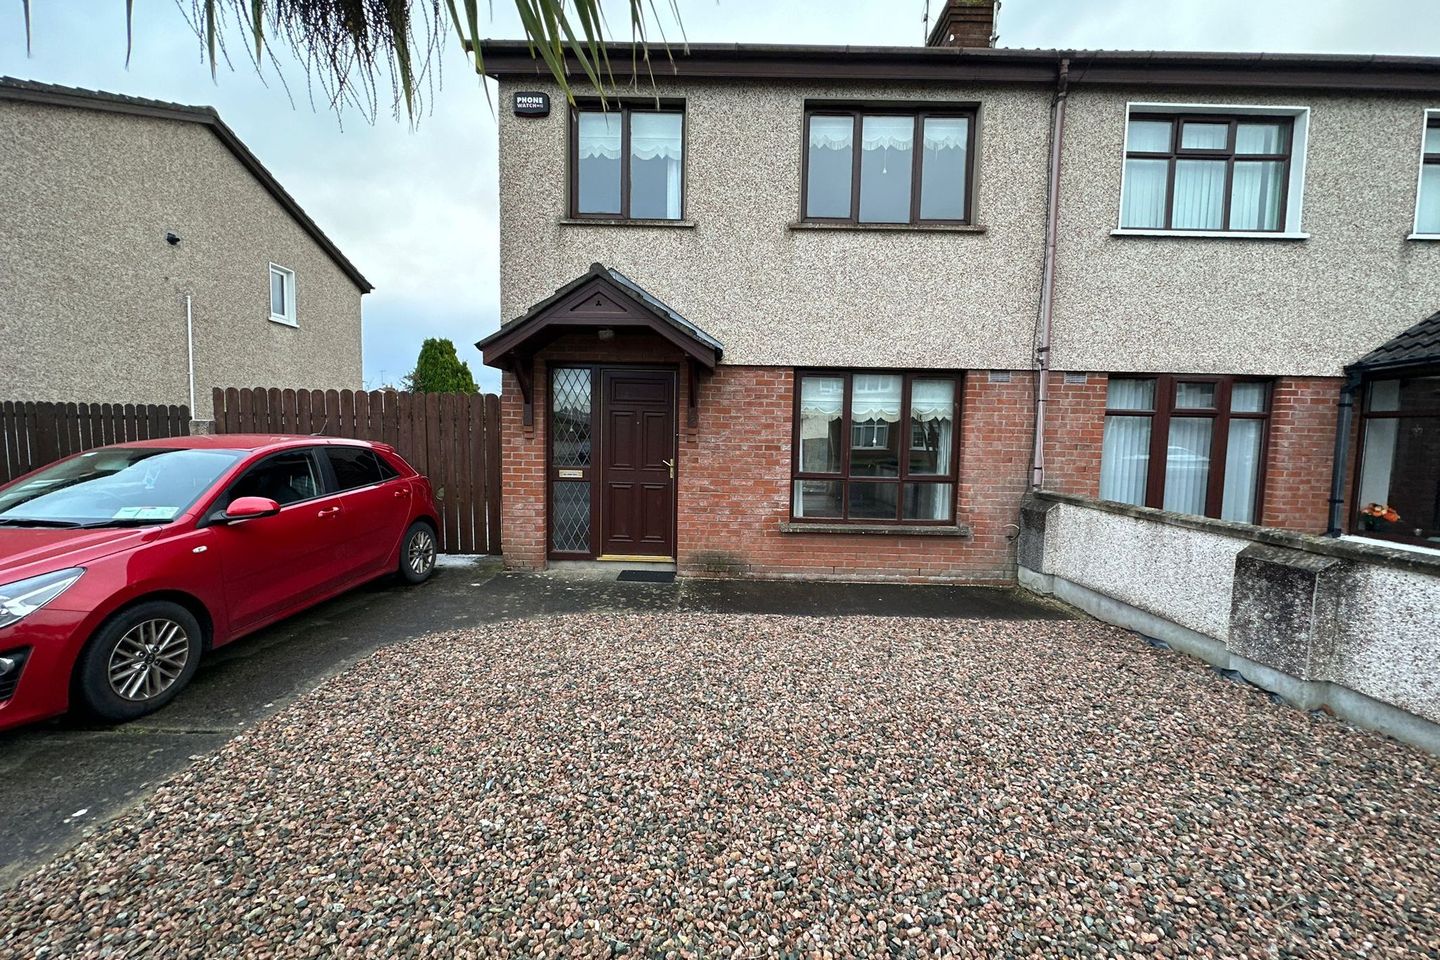 139 Cedarfield, Donore Road, Drogheda, Co. Louth, A92TPE0